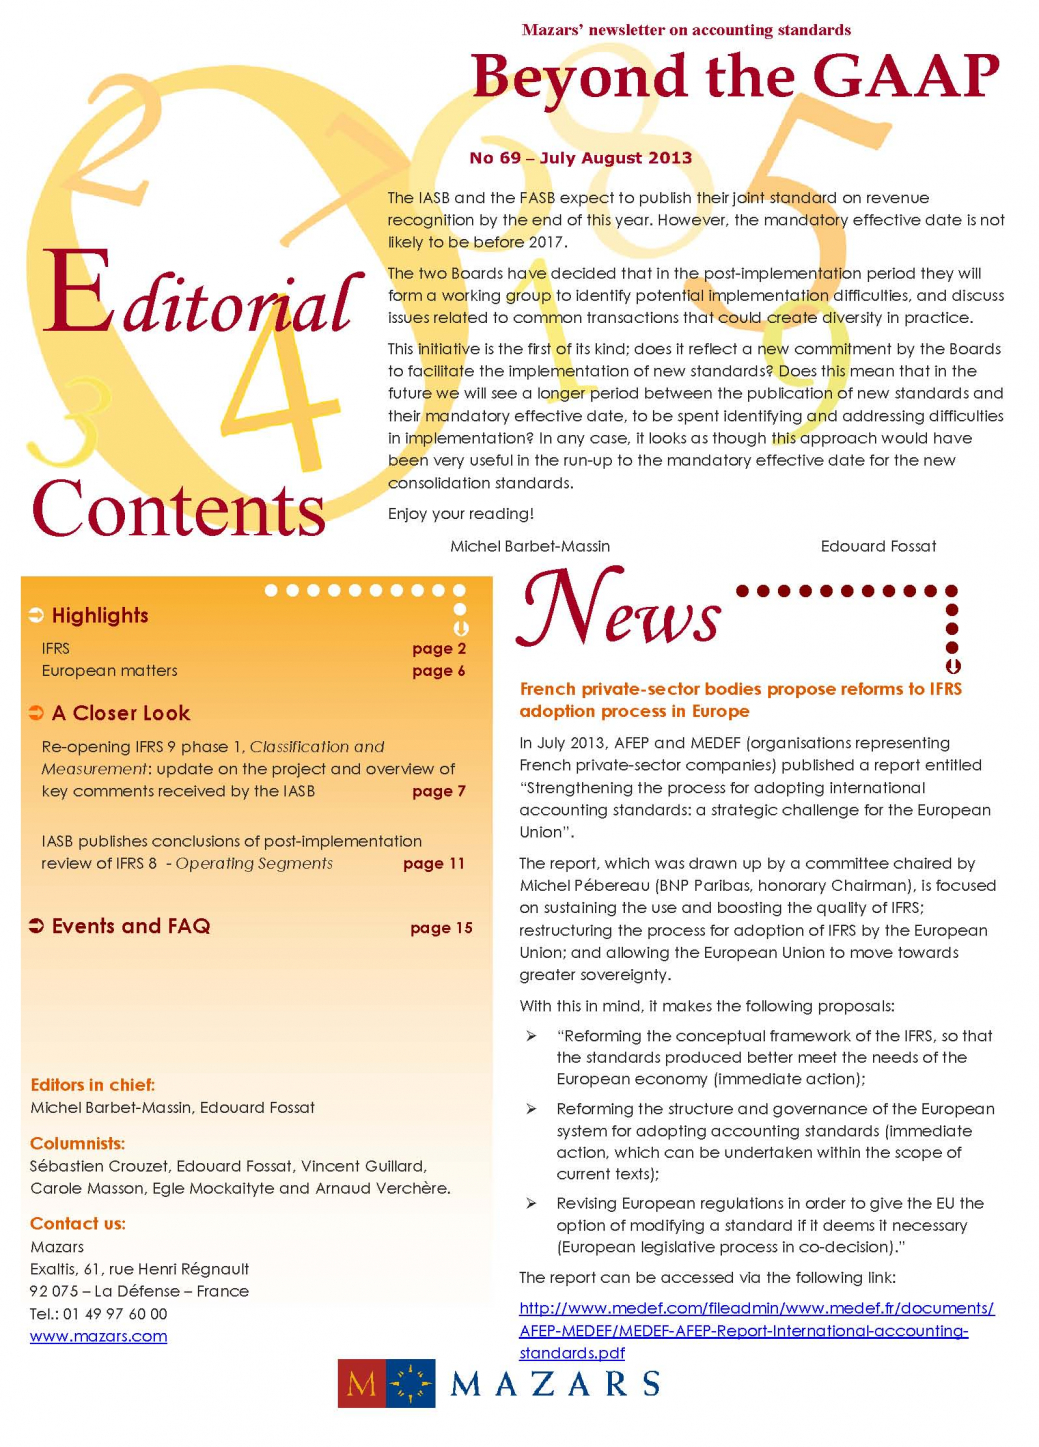 IFRS Newsletter July-August 2013 en cover